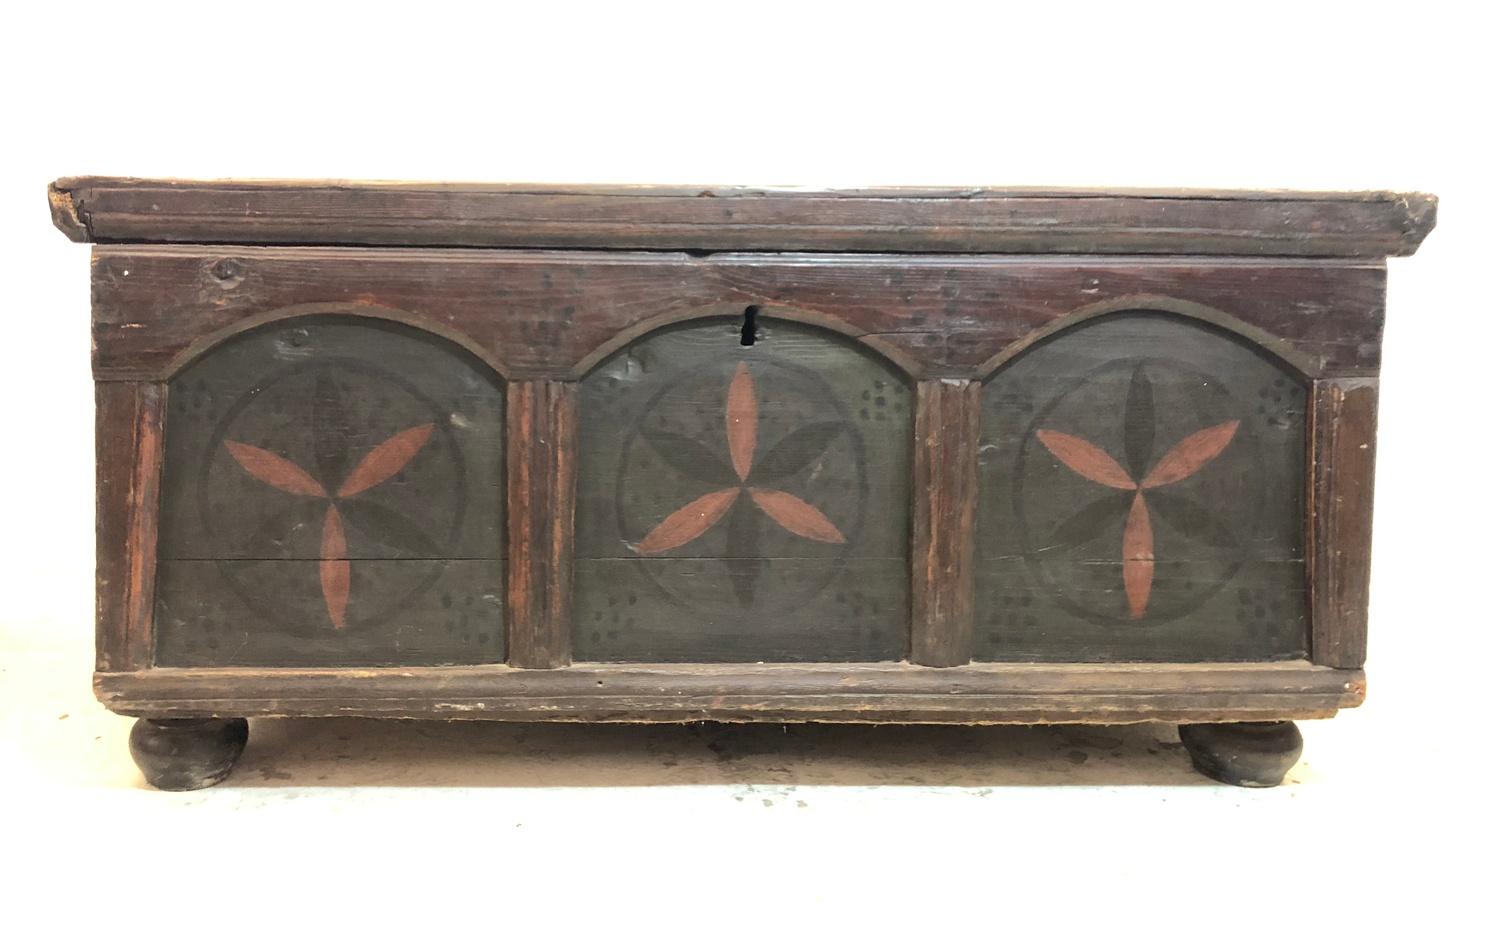 Large Late C18th/Early C19th Ukrainian Painted Pine Coffer marked with propeller symbols to ward off - Image 3 of 4